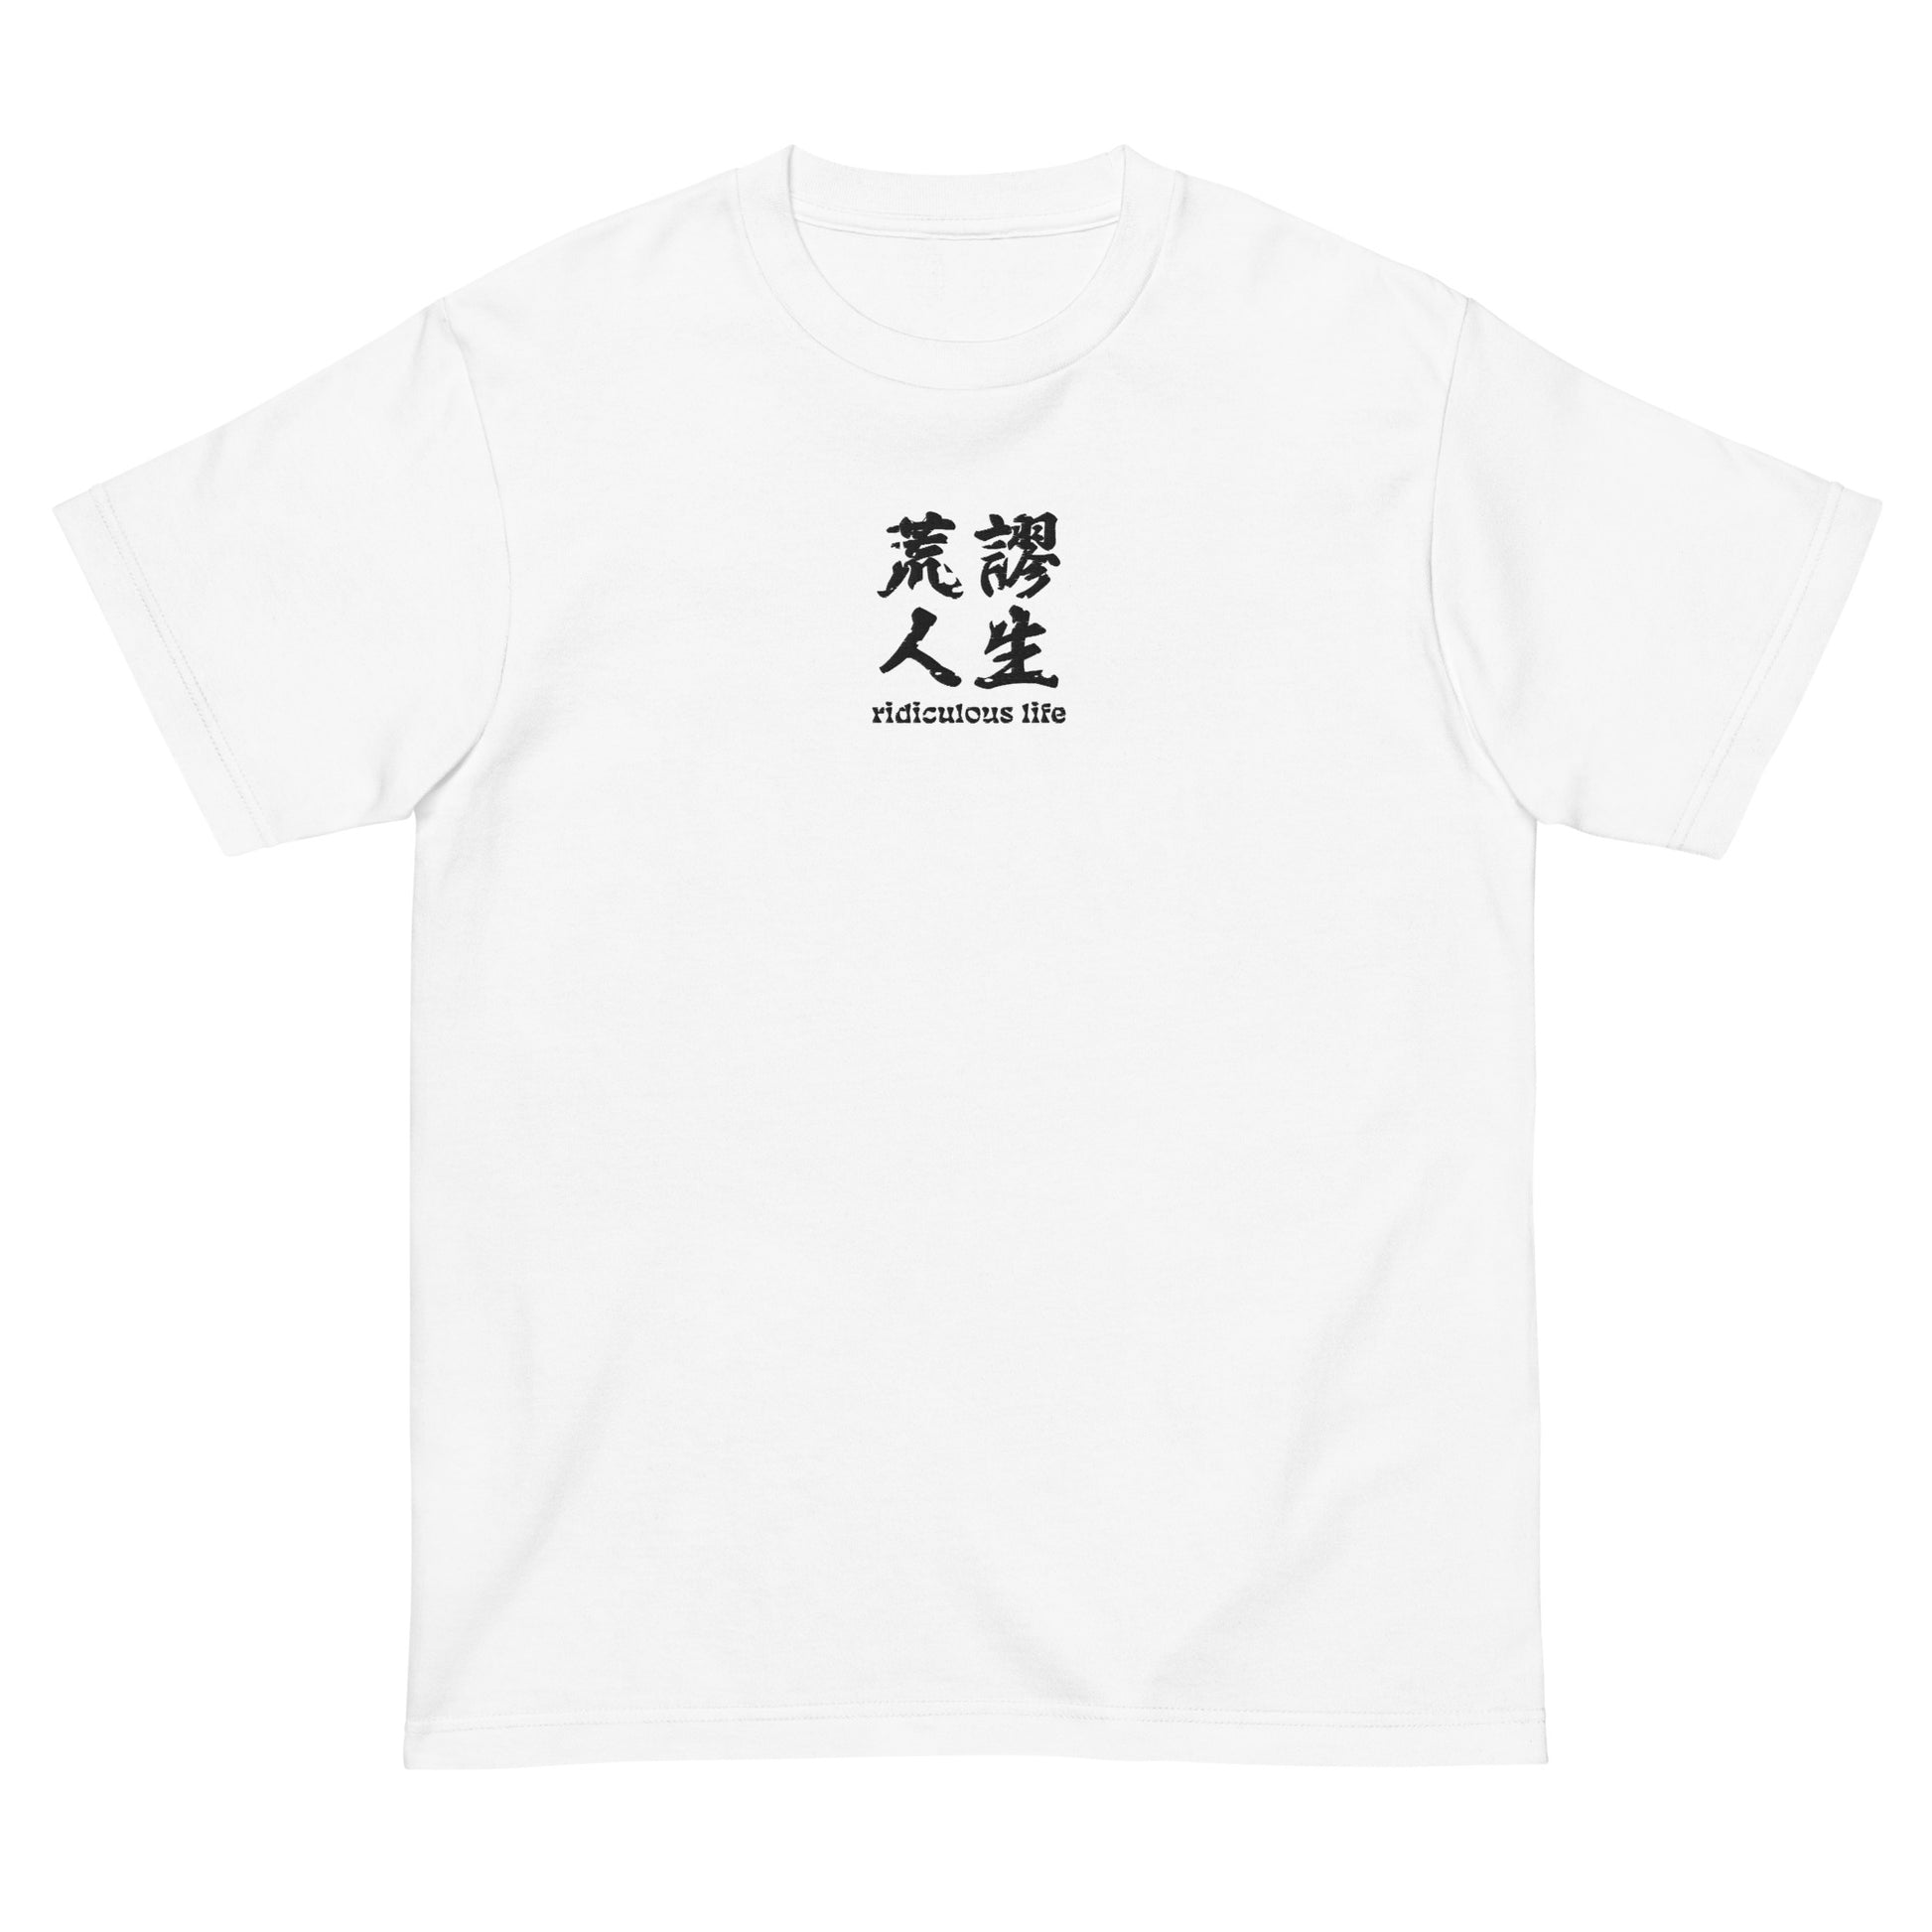 White High Quality Tee - Front Design with an Black Embroidery "Ridiculous Life" in Chinese and English